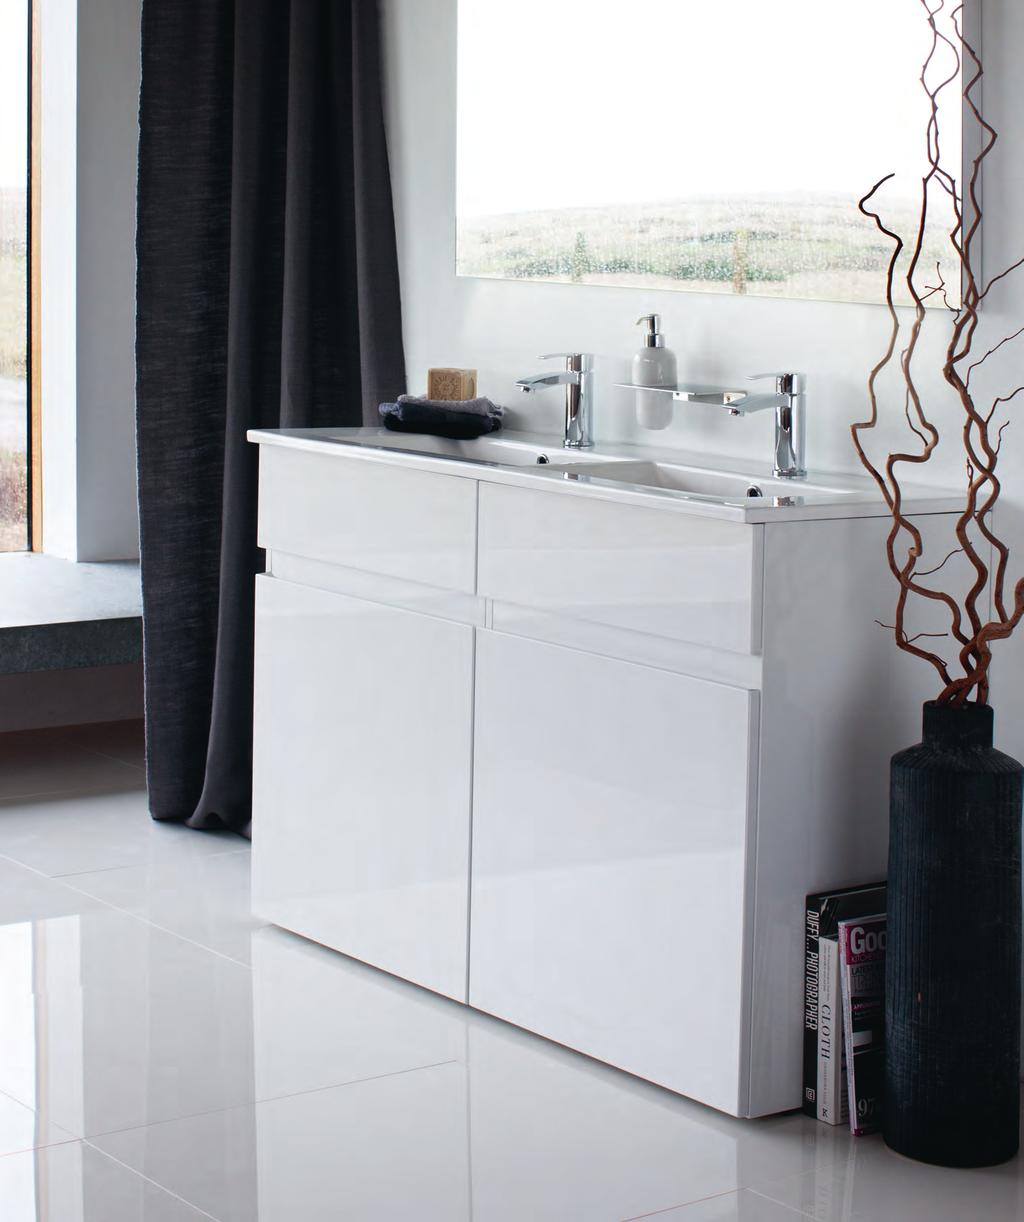 FURNITURE FURNITURE Britton offers fantastic furniture collections, specifically designed for the bathroom environment.